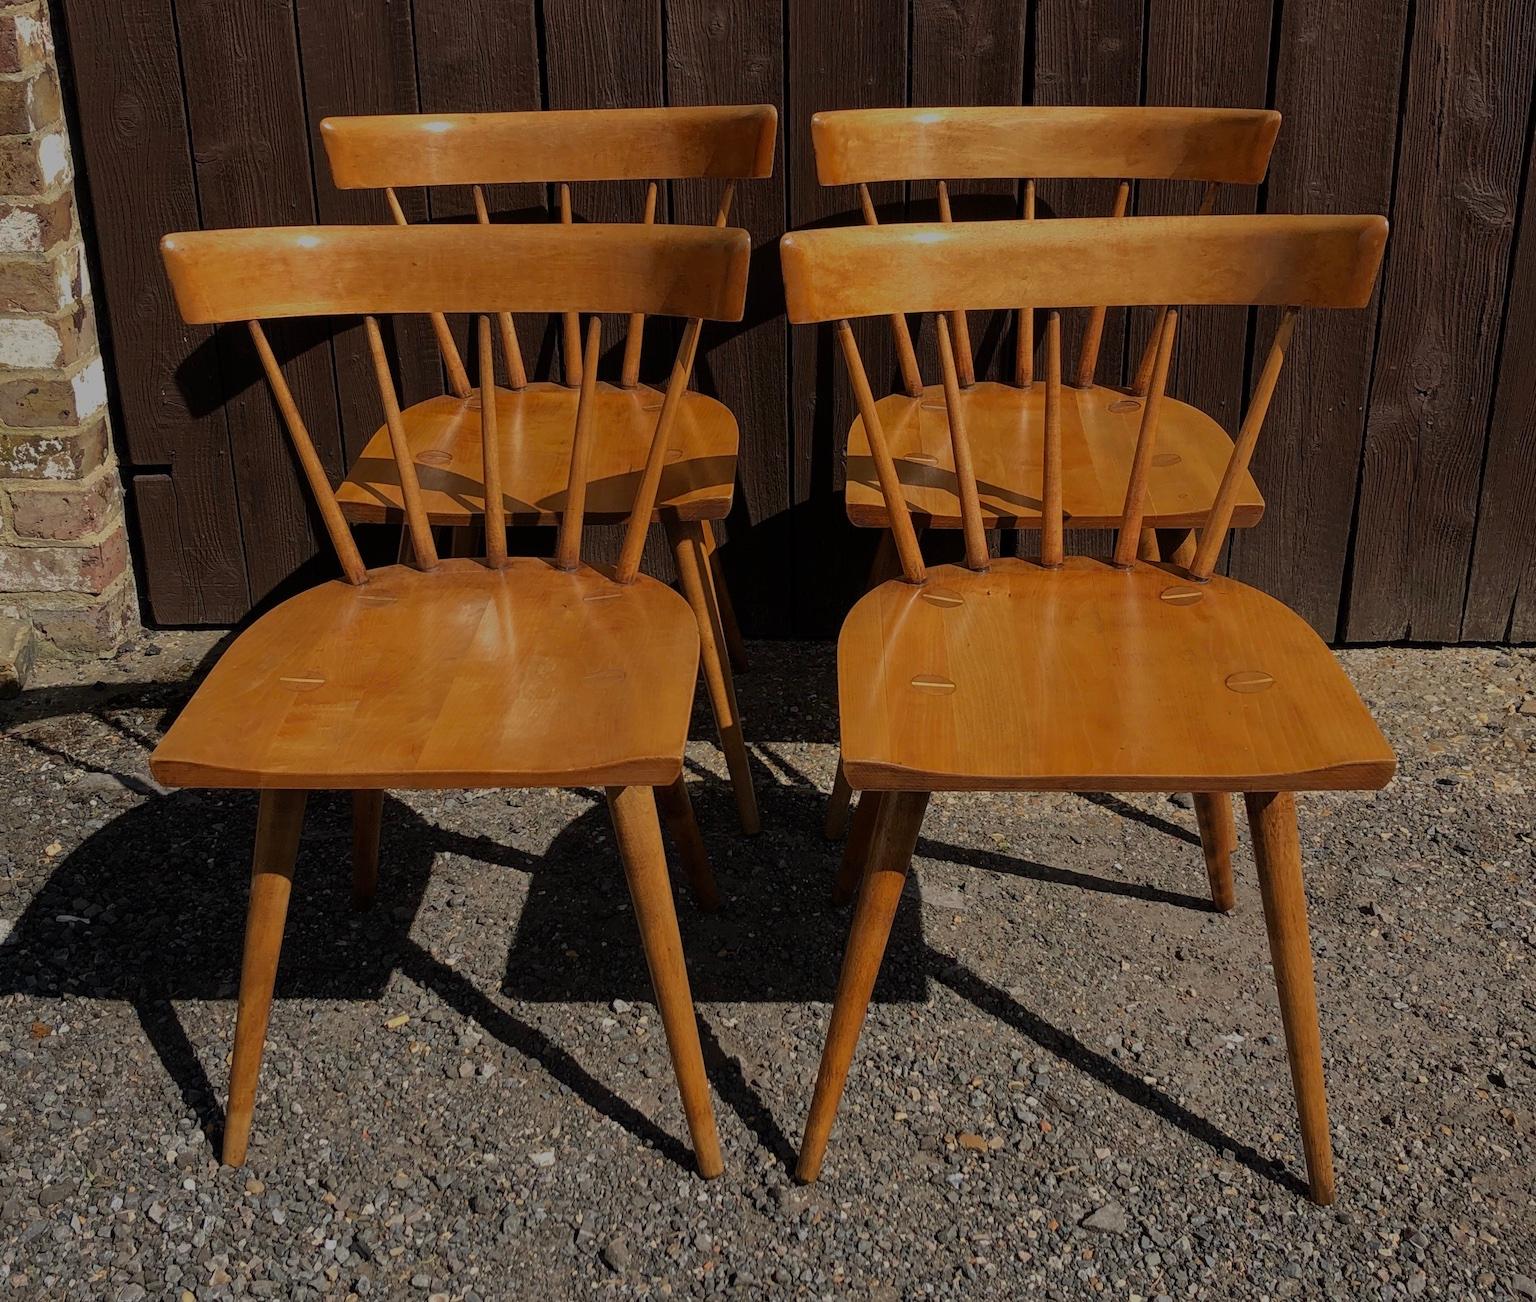 Mid-Century Modern set of 4 Paul McCobb dining chairs, American, 1950

Stunning set of four dining chairs in solid maple from Paul McCobb's iconic Planner Group, manufactured by Winchendon Furniture from 1950-1964 by. 
The chair, model #1531,